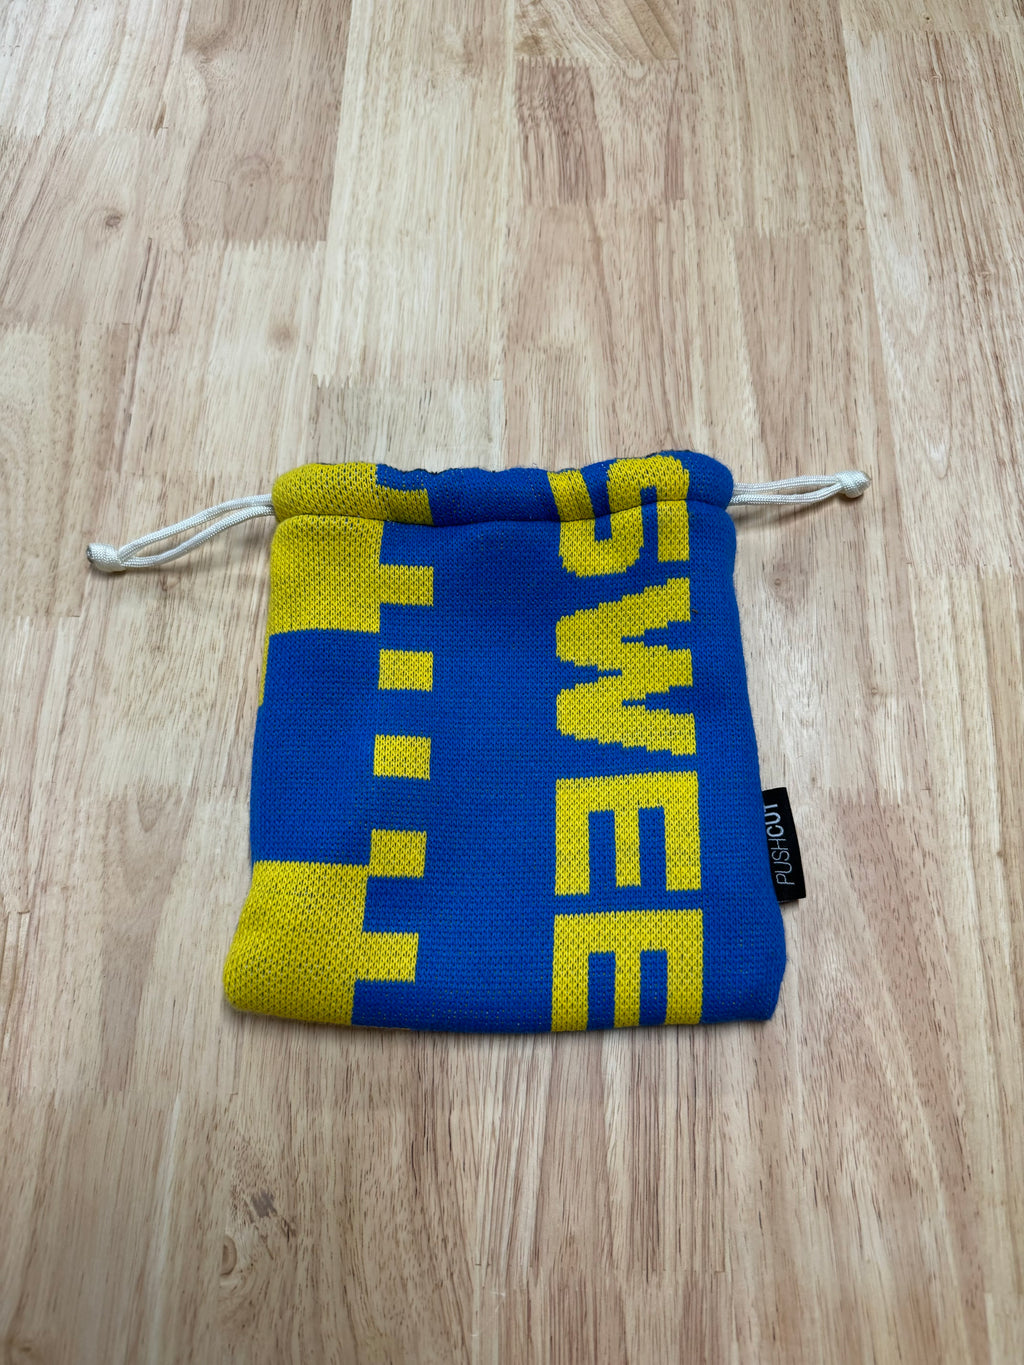 Unreleased Sample: Valuables Pouch made from Sweetens Cove Scarf